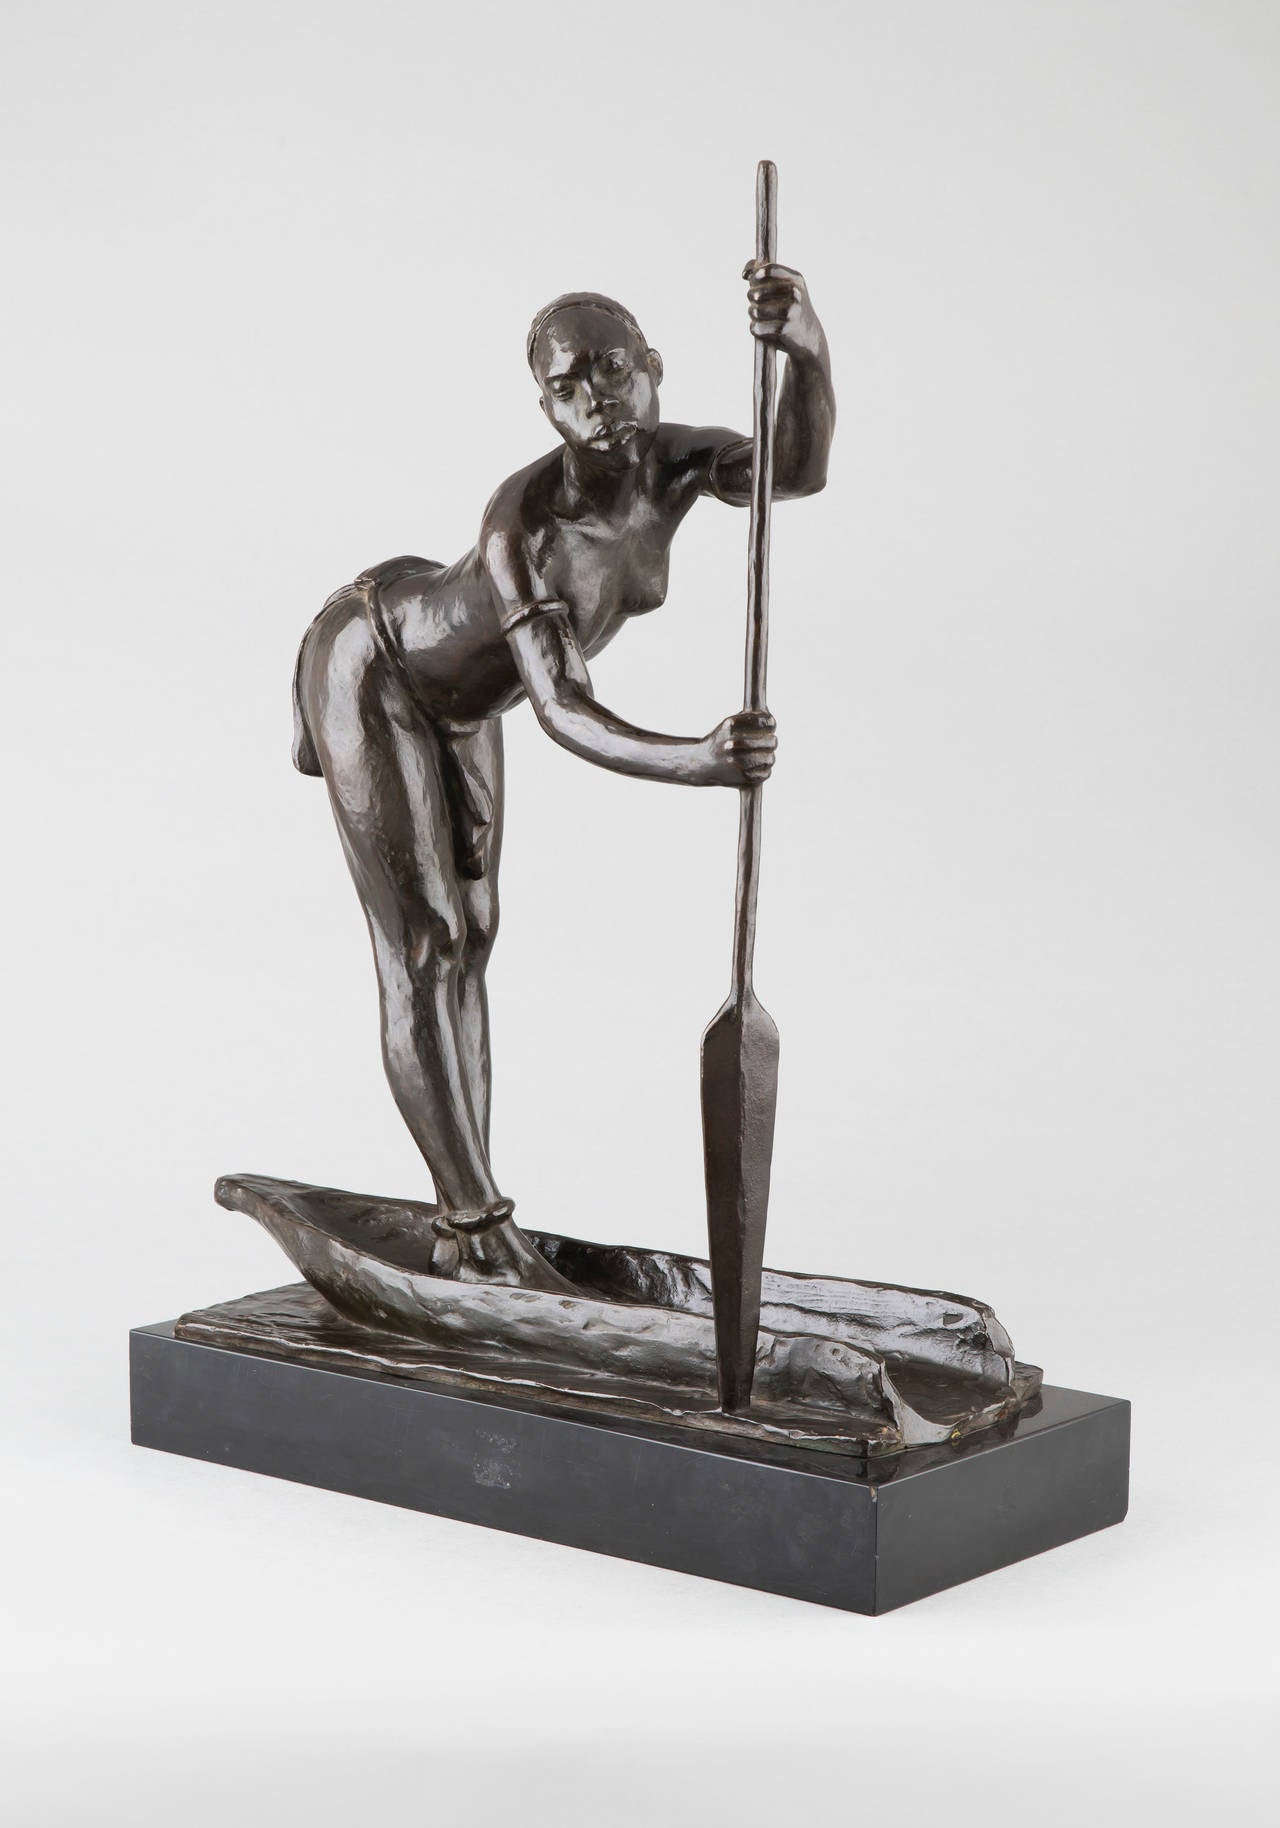 Arthur Dupagne
(1895-1961)

Woman on a piroque
Authentic bronze sculpture with a dark brown patina
raised on a black marble base

signed 'Dupagne'
Belgian School
circa 1940

Dupagne was a sculptor born in the Belgian city of Liège (Luik)